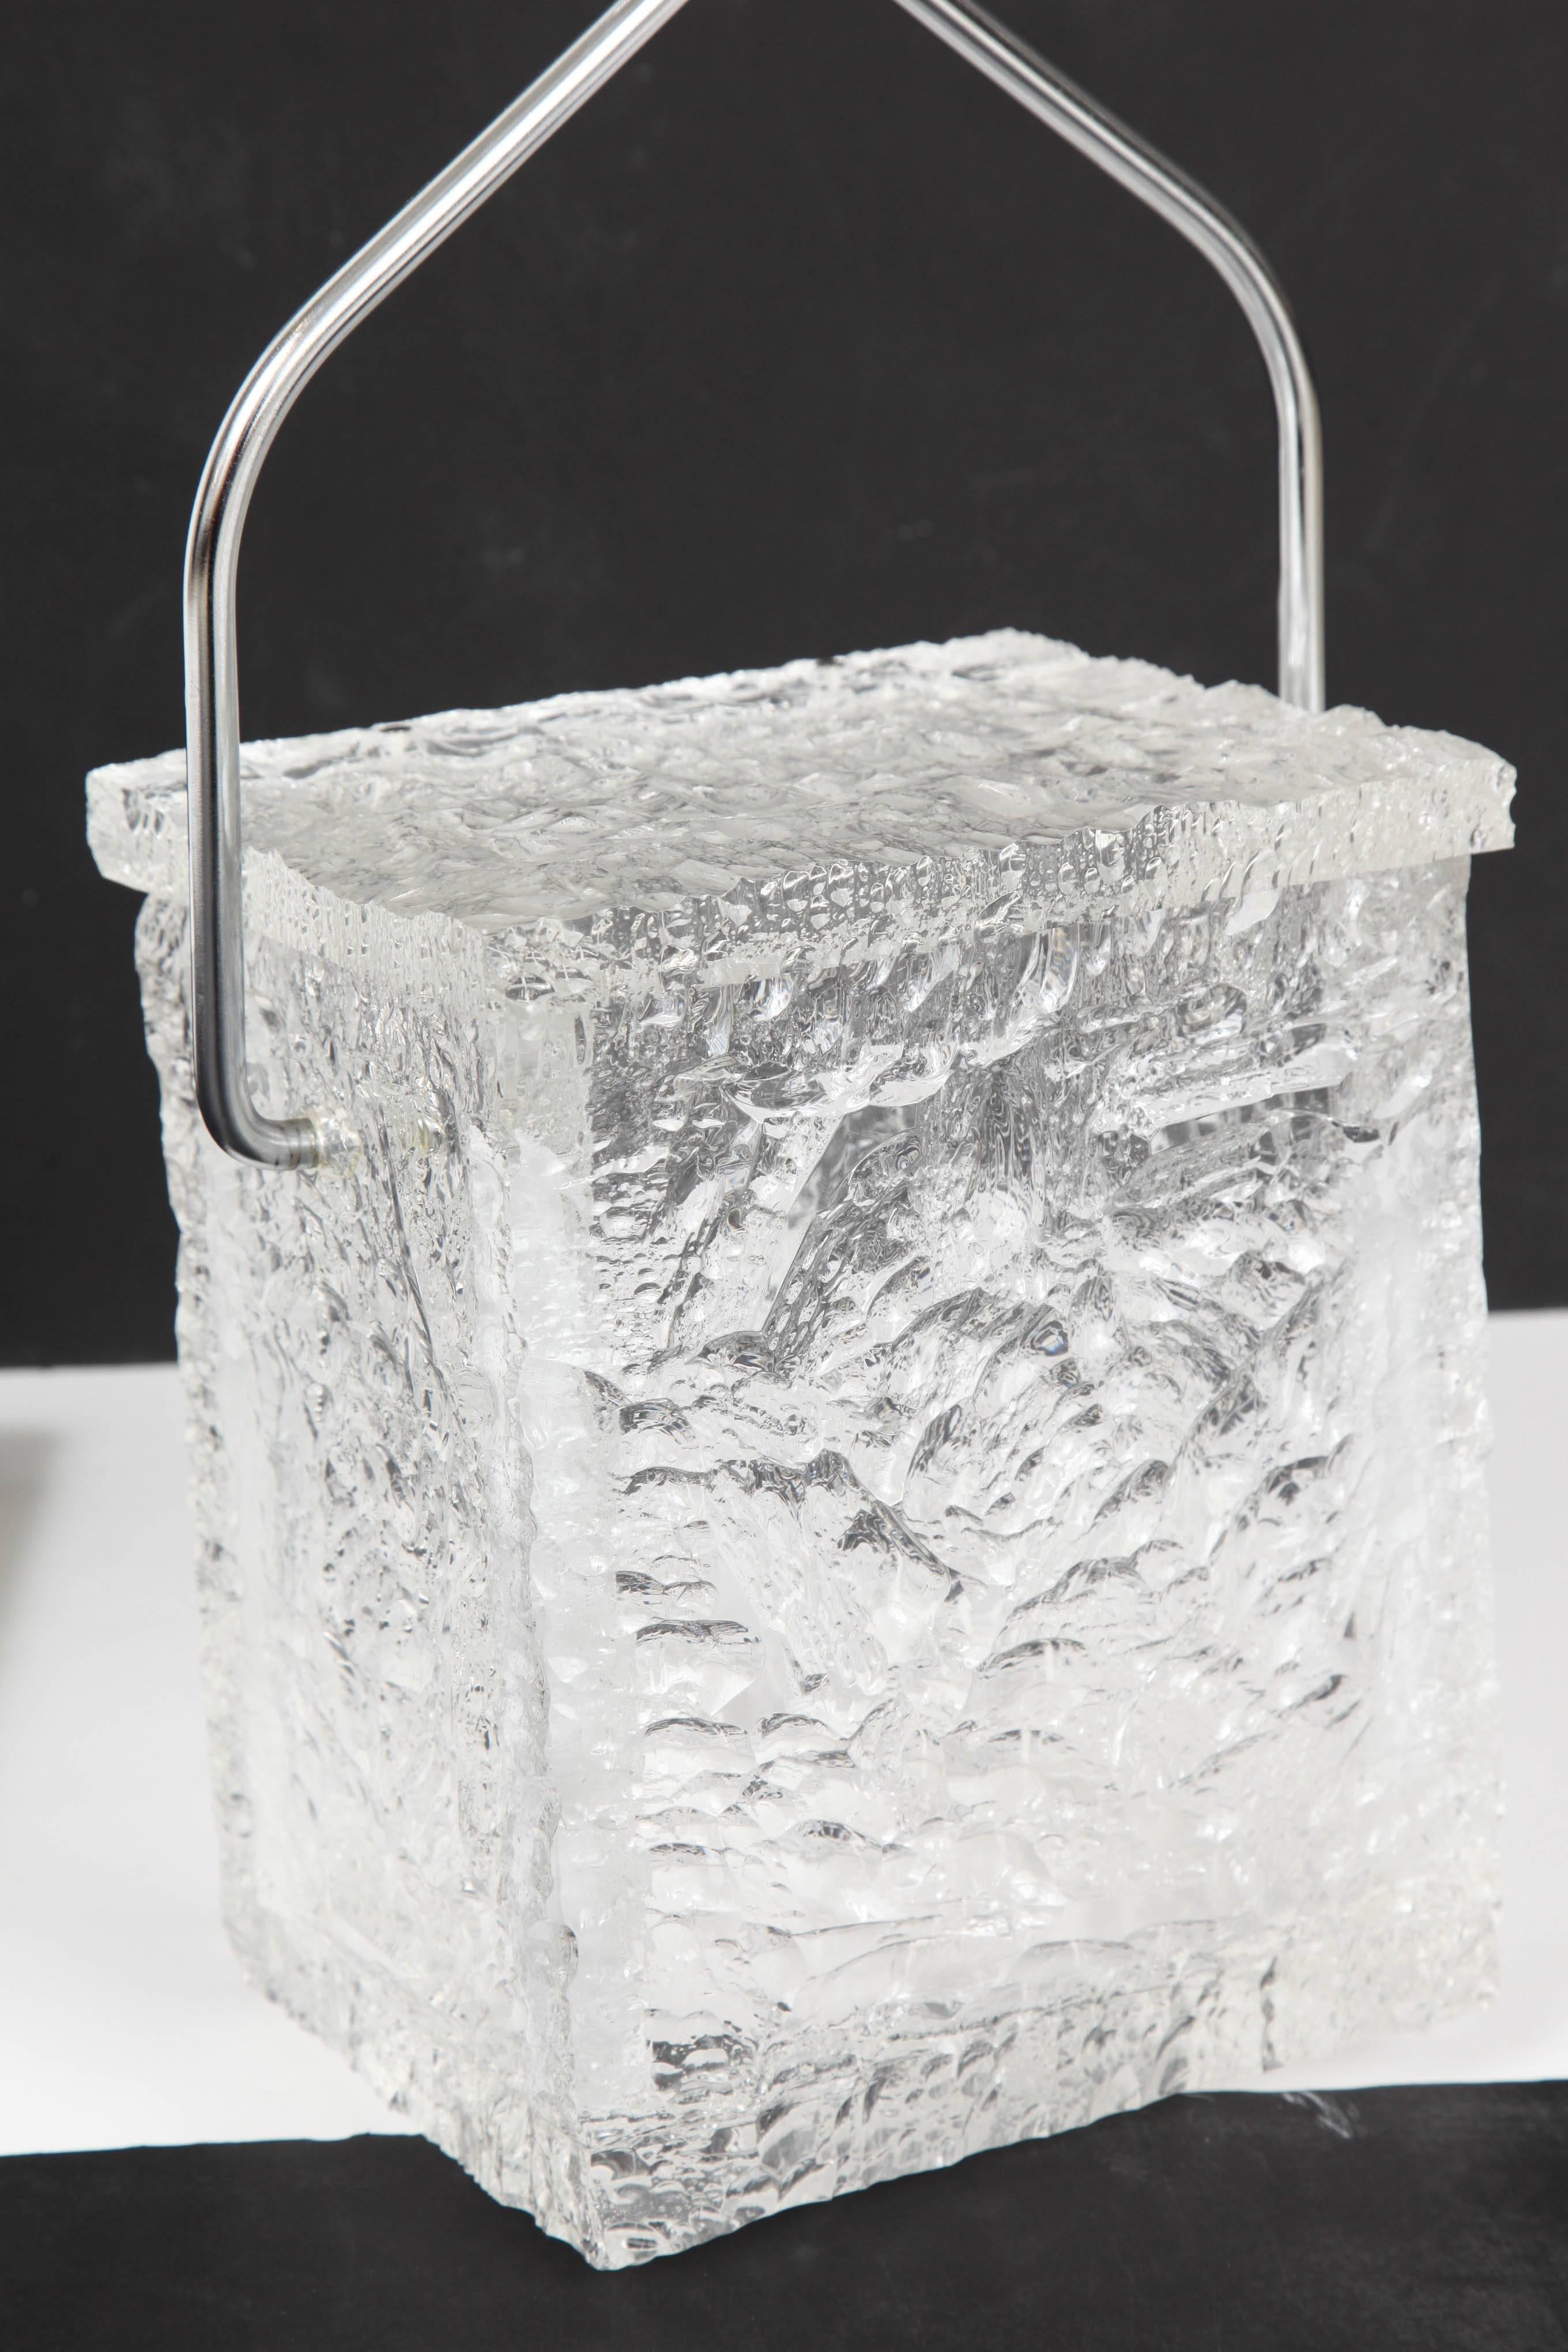 Textured massive Lucite hinged-lidded box replicates a solid block of ice, the chrome handle in the form of ice tongs. American, 1960s. Excellent original condition throughout. Bucket 9" high with handle folded.